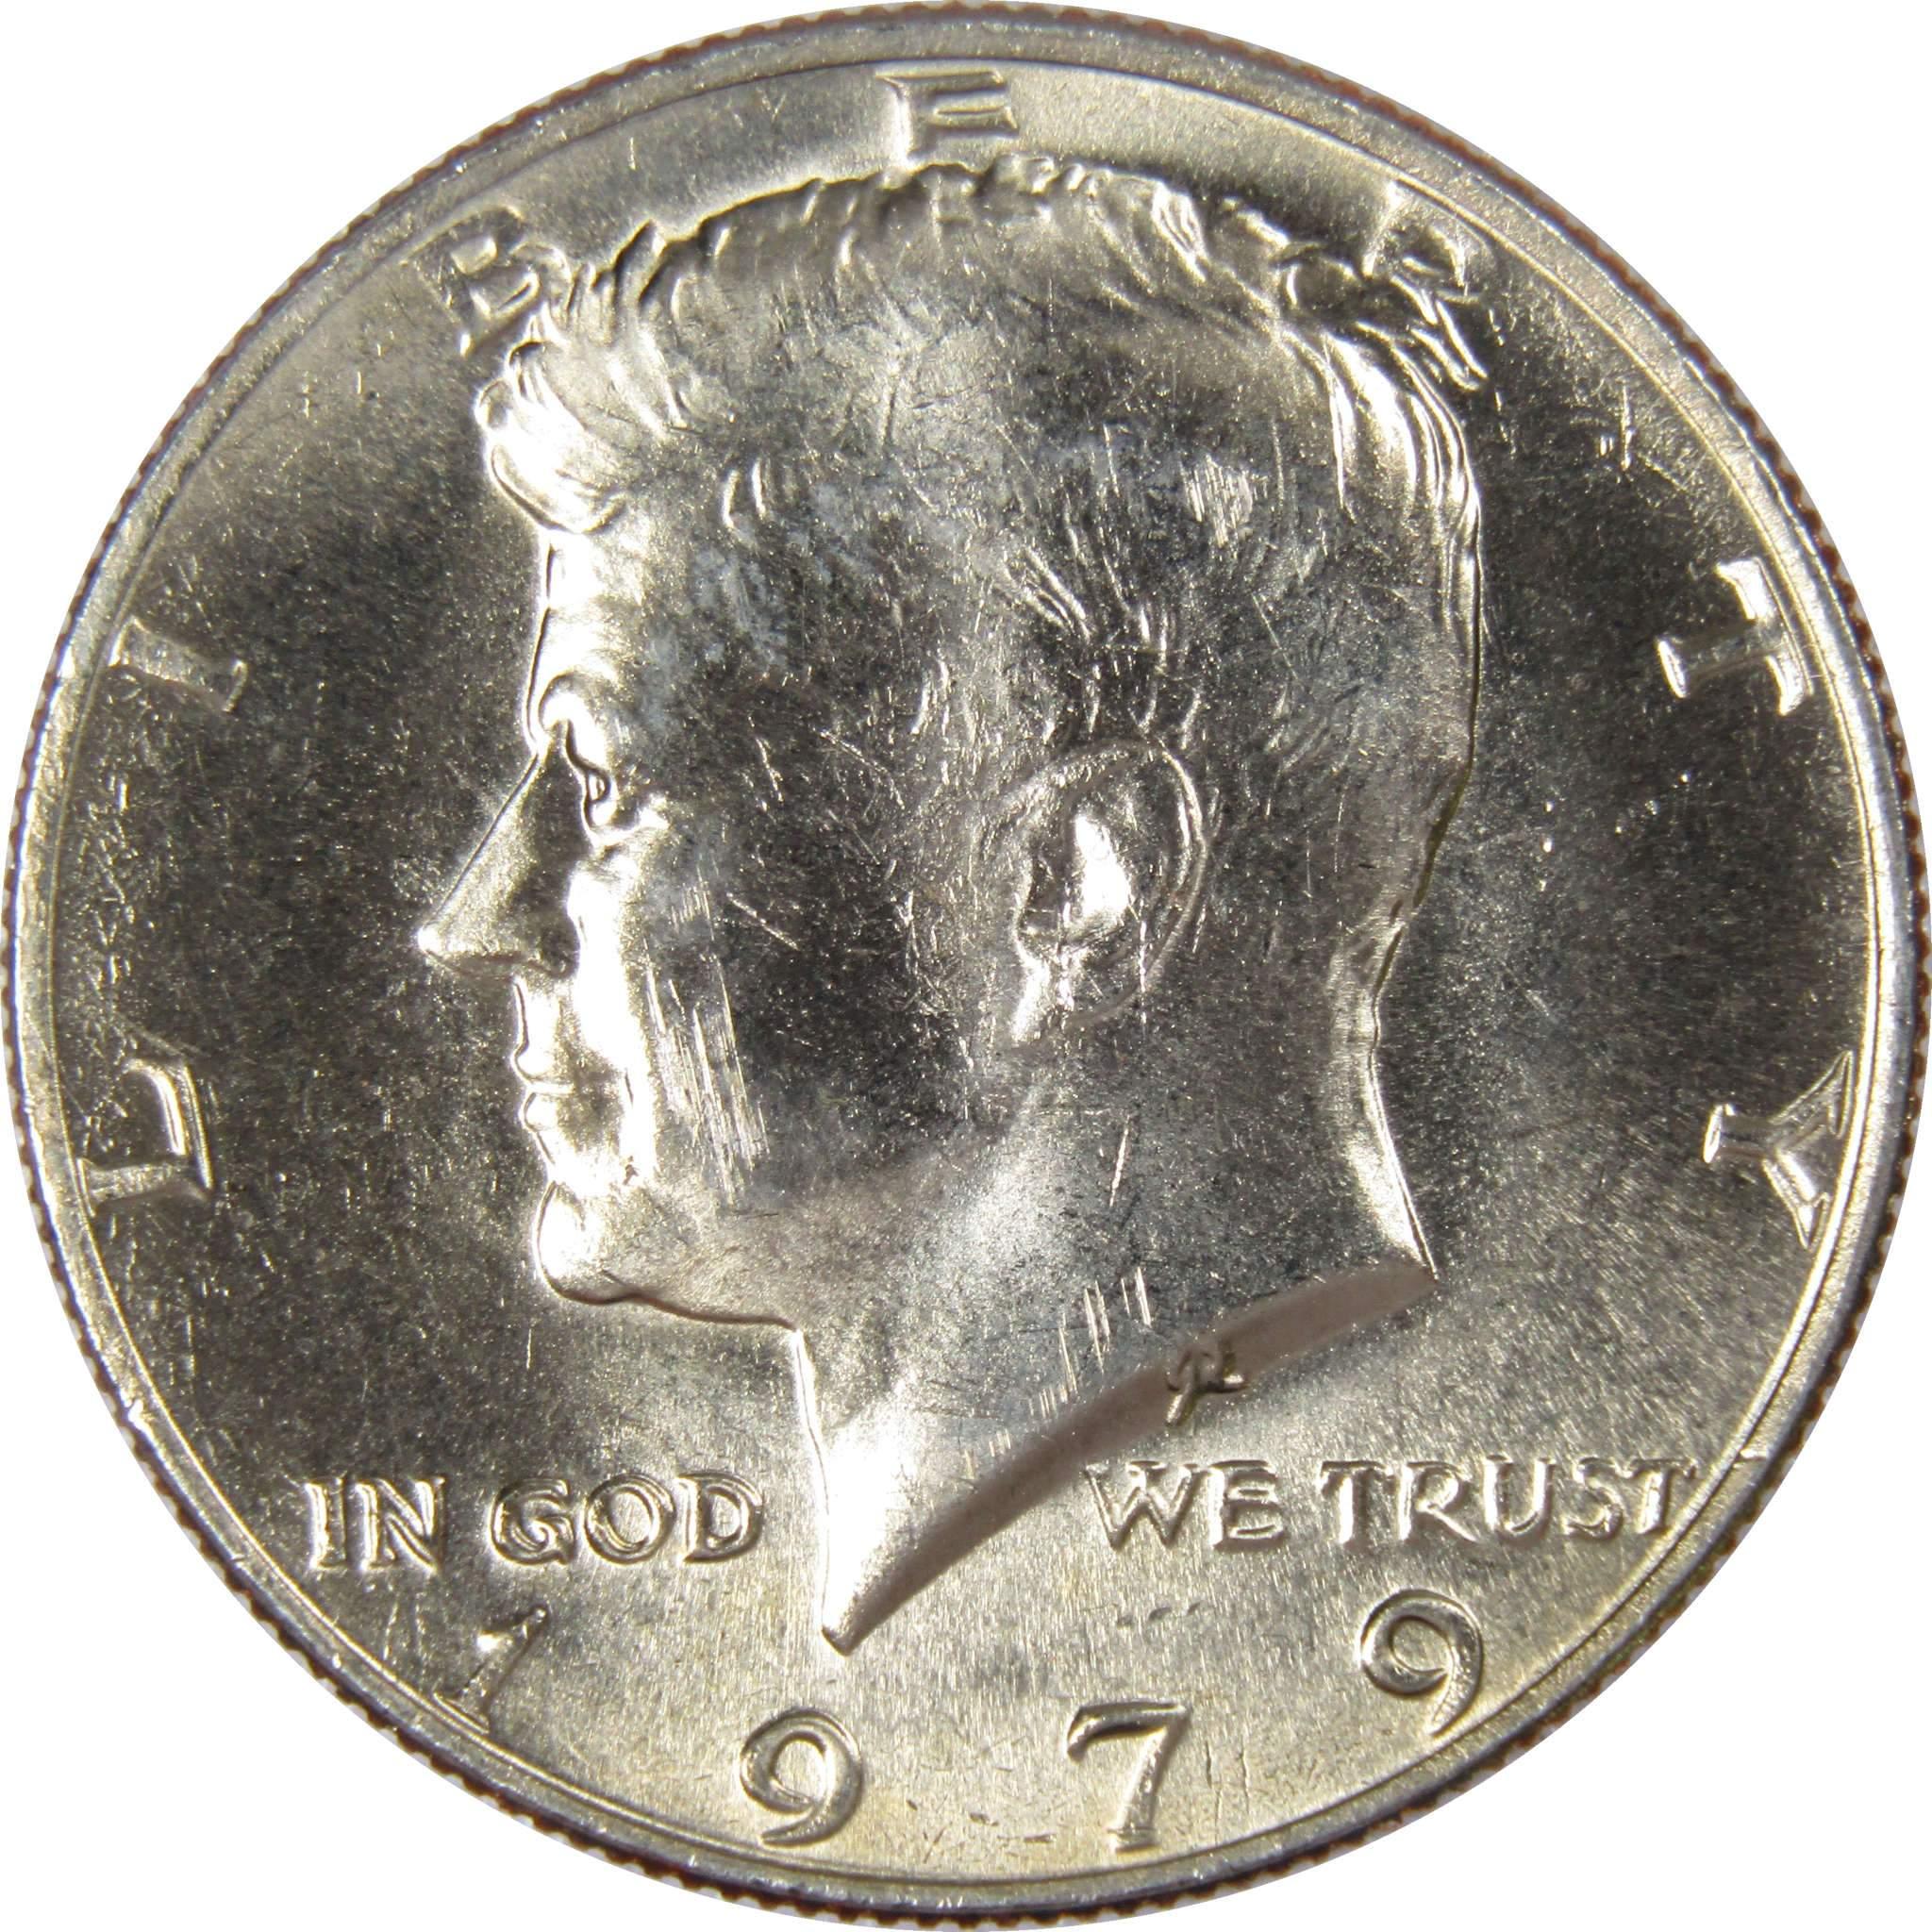 1979 Kennedy Half Dollar BU Uncirculated Mint State 50c US Coin Collectible